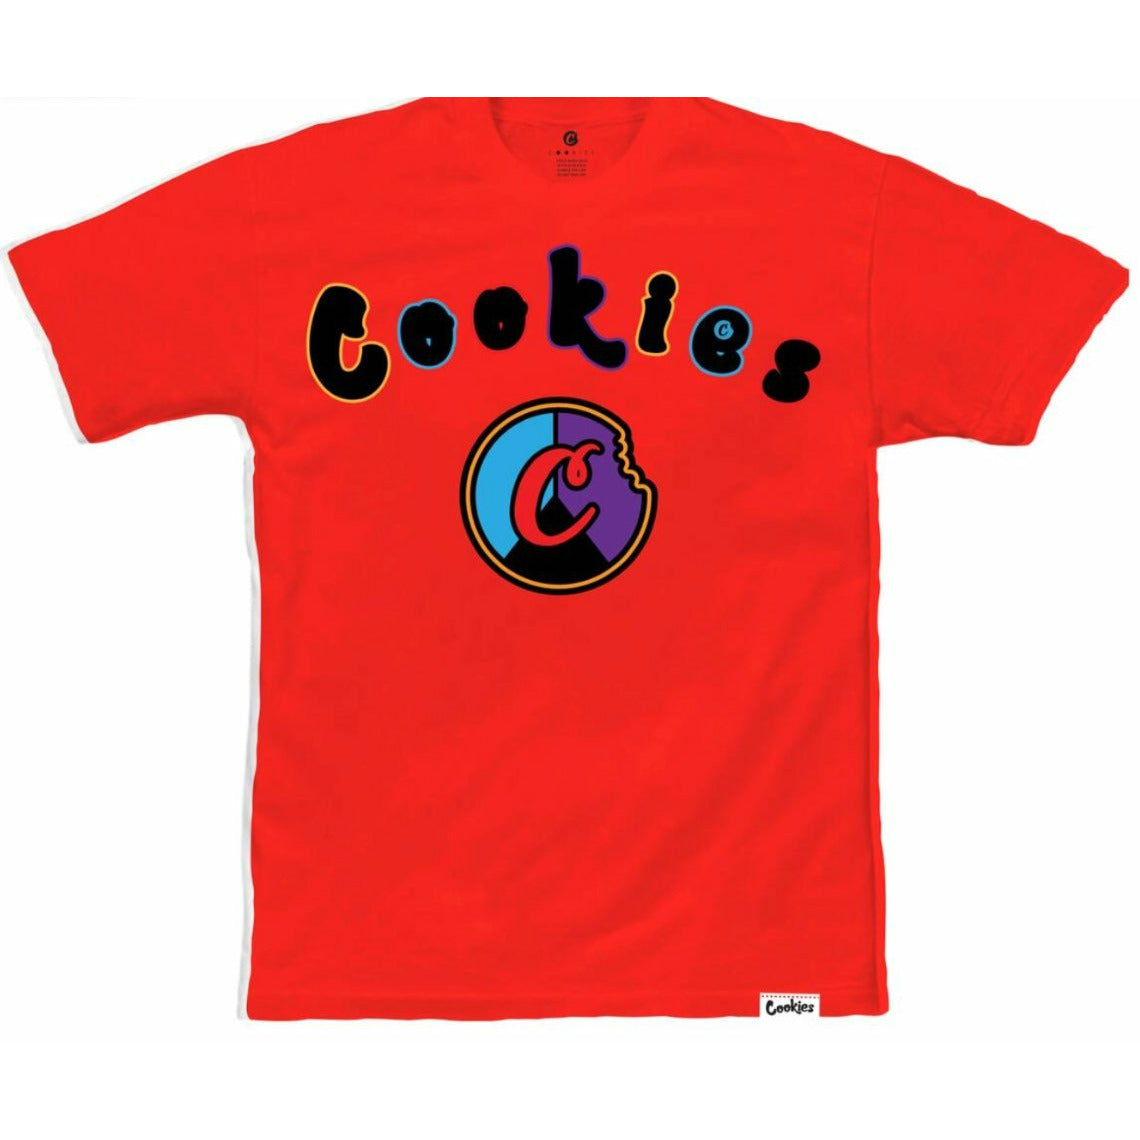 Cookies Show and Prove Tee Red - Dousedshop